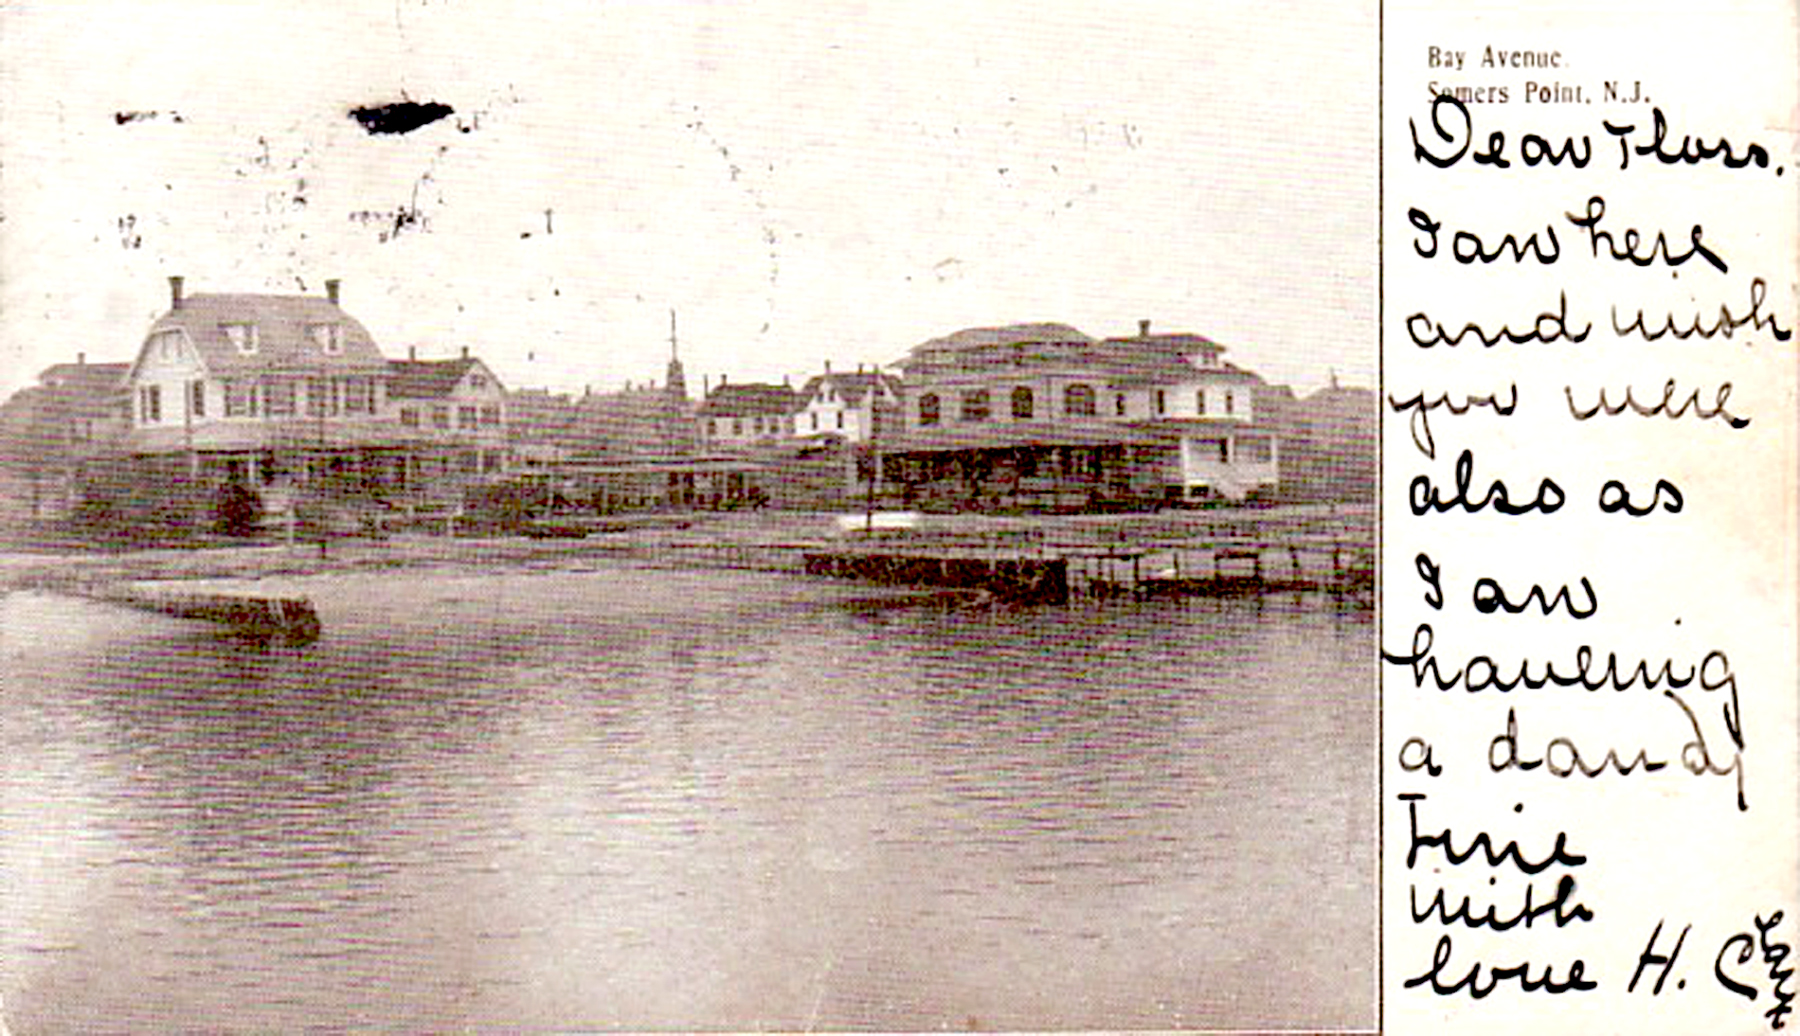 Somers Point - Bay Avenue - 1906